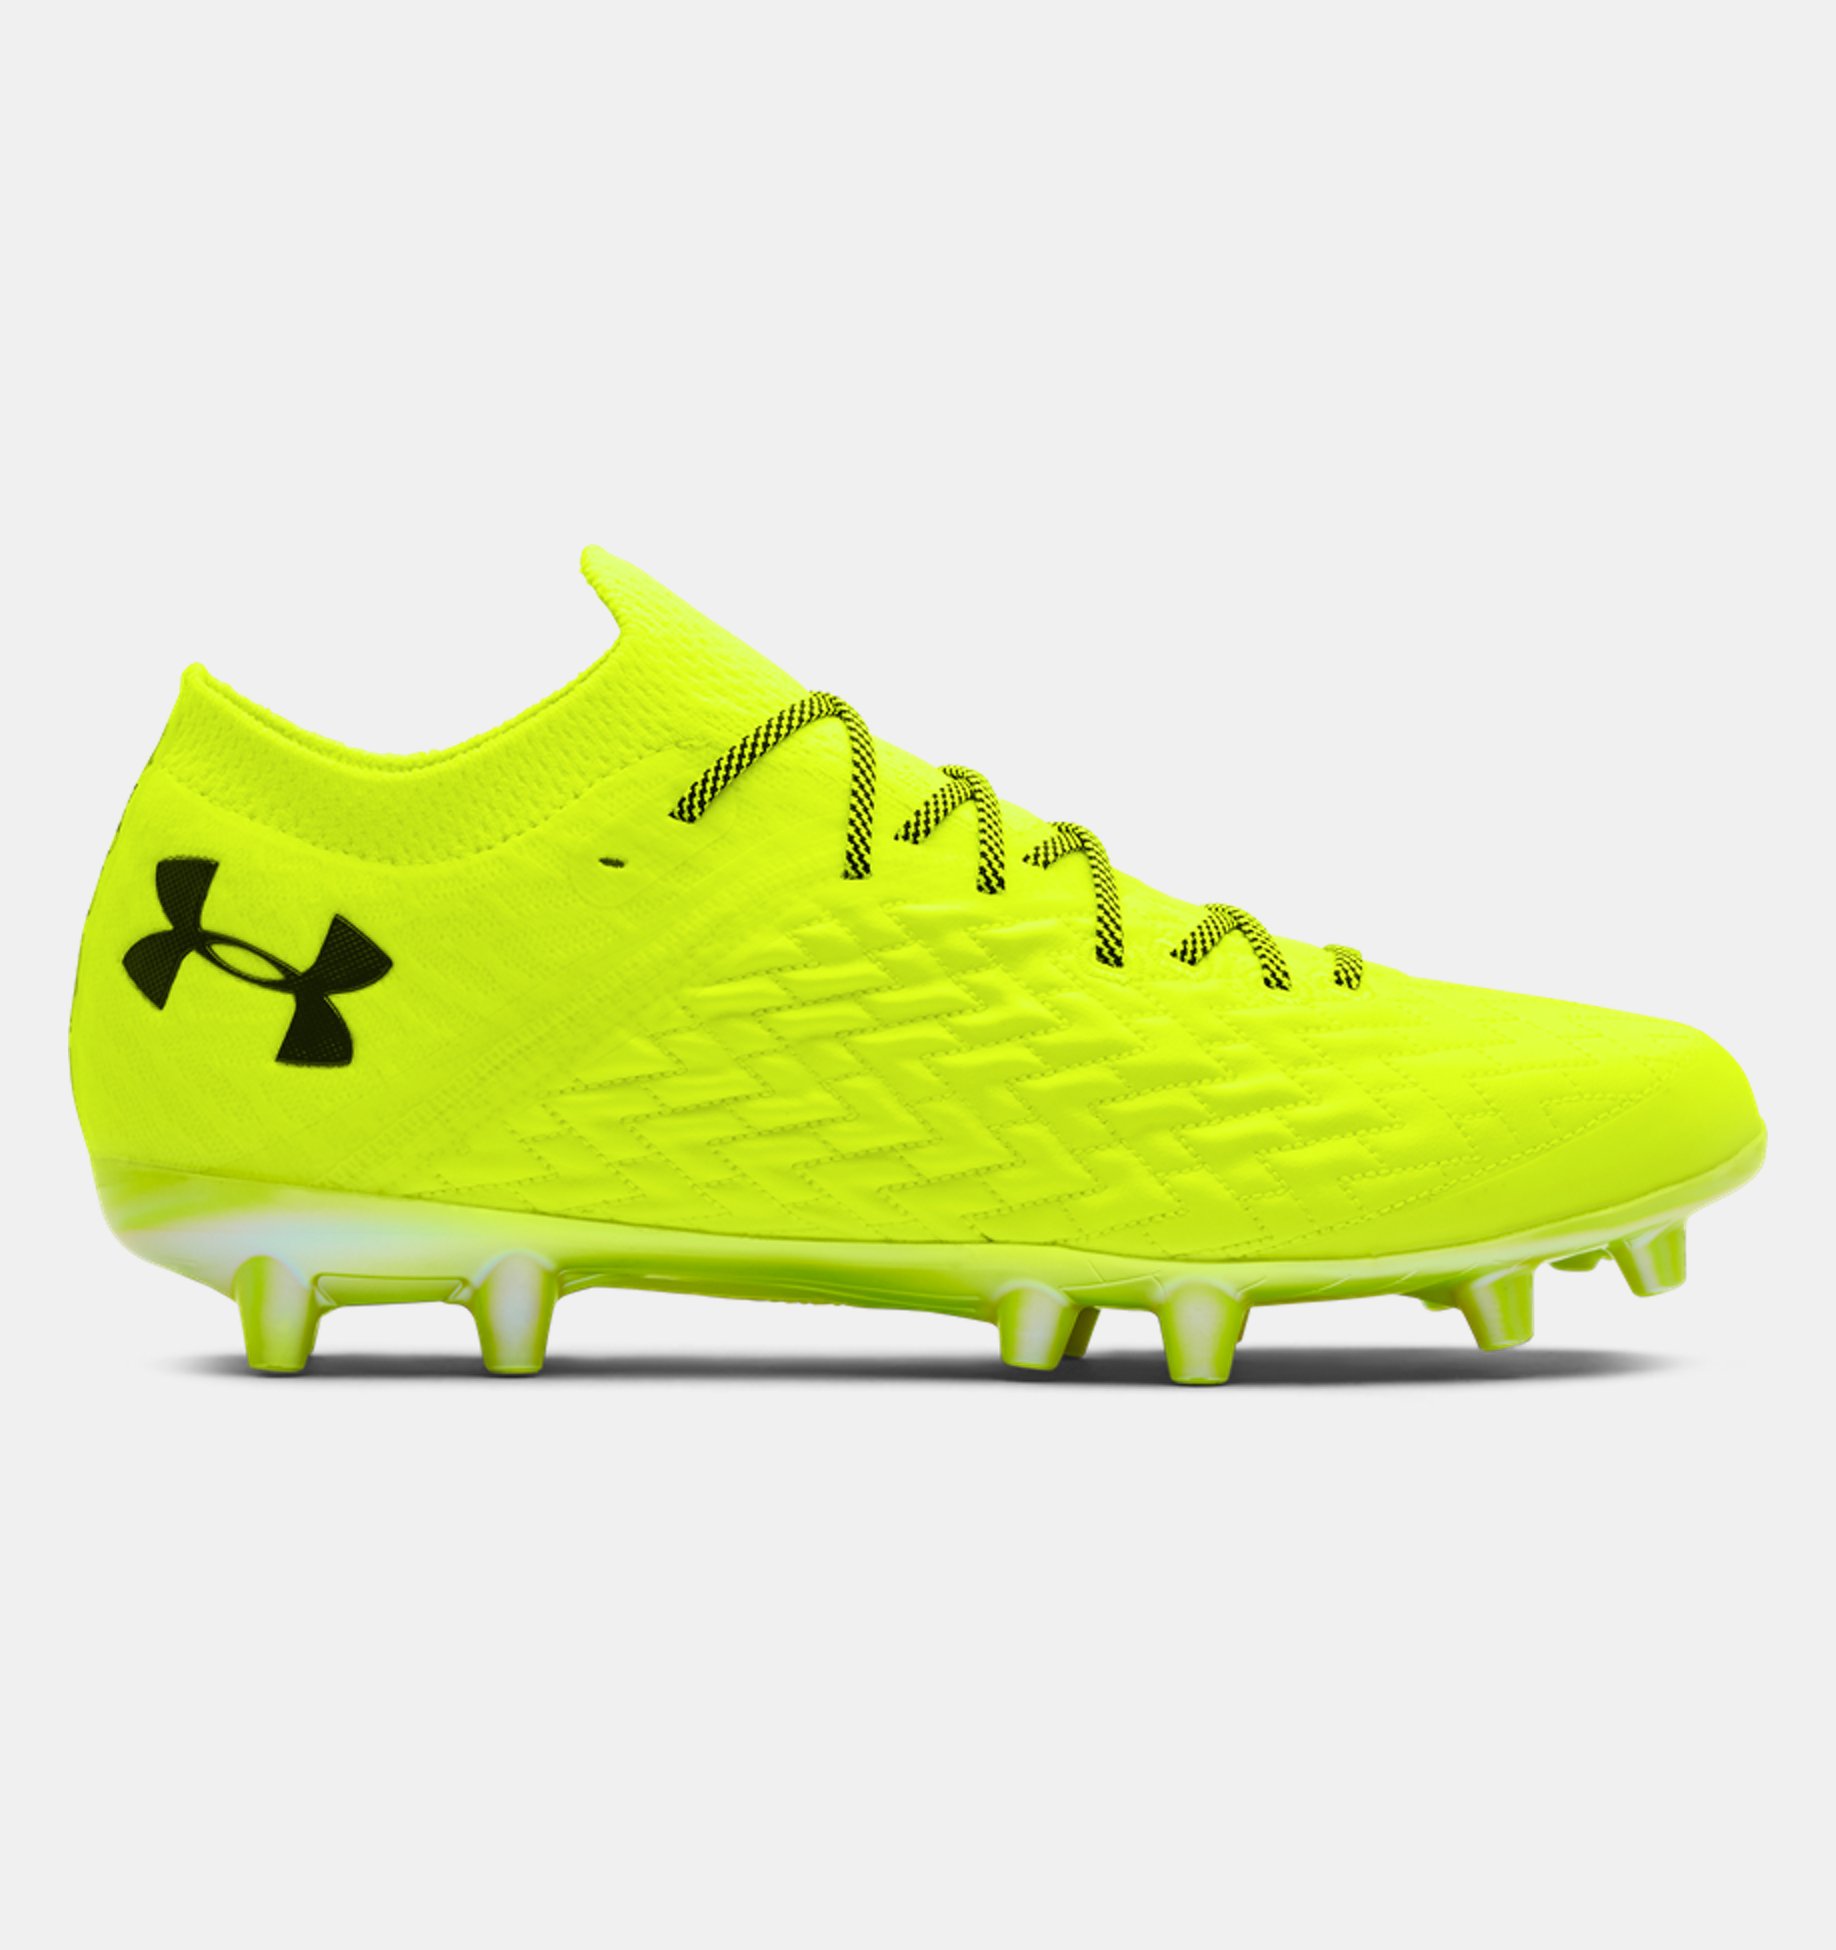 Under Armour Mens Team Magnetico Hybrid SG Football Boots Soft Ground Shoes 